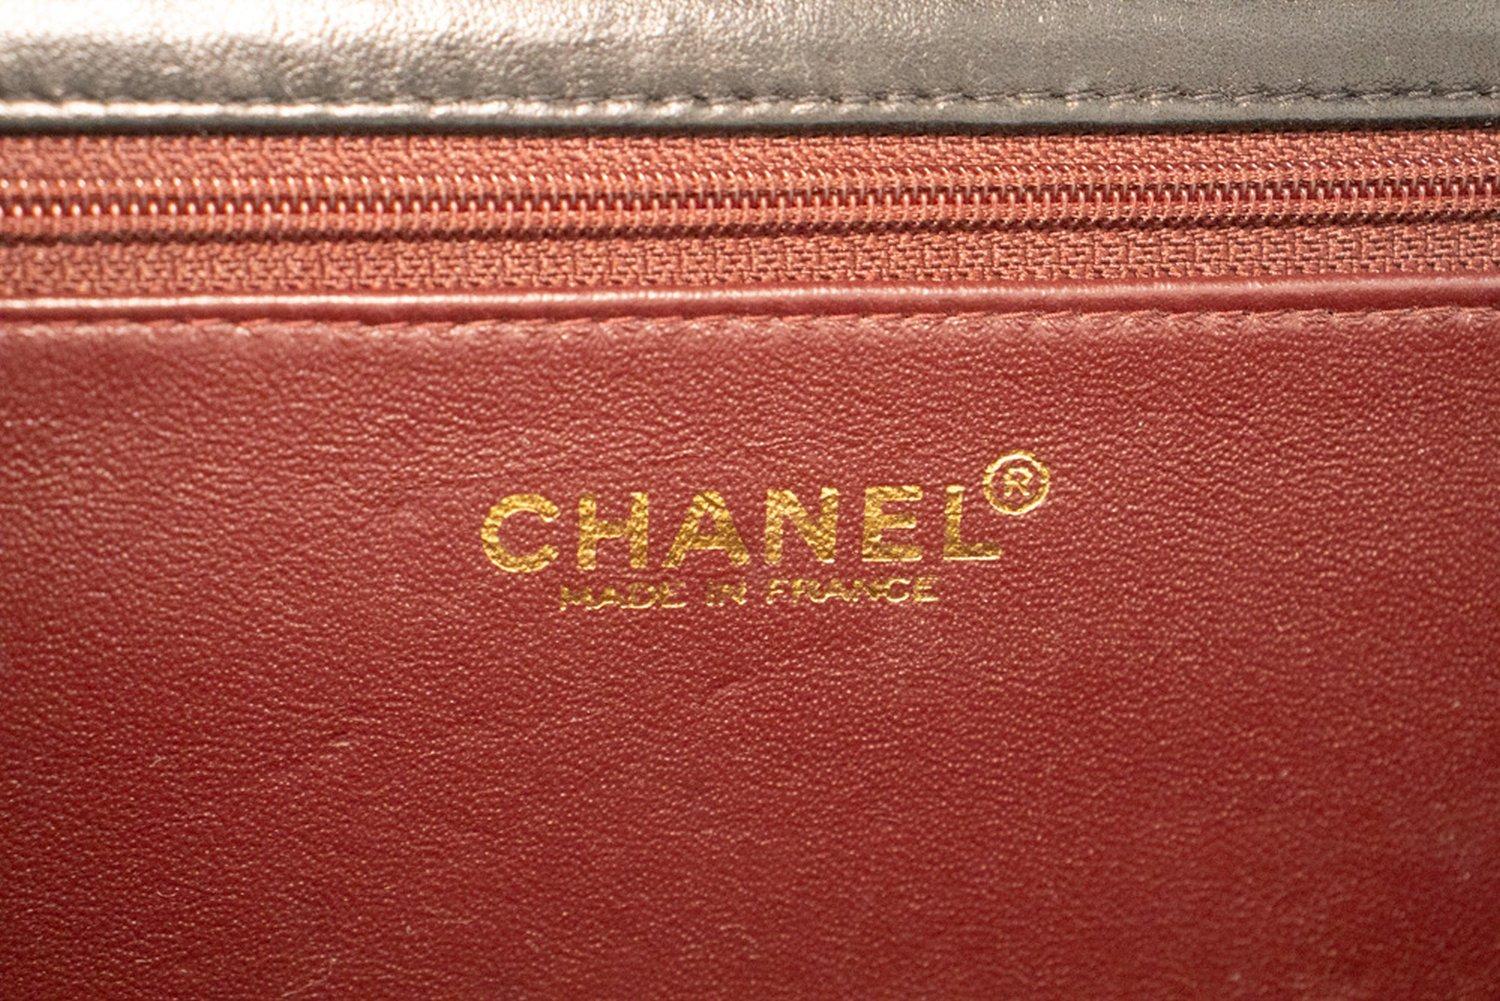 CHANEL Full Chain Flap Shoulder Bag Black Clutch Quilted Lambskin For Sale 11